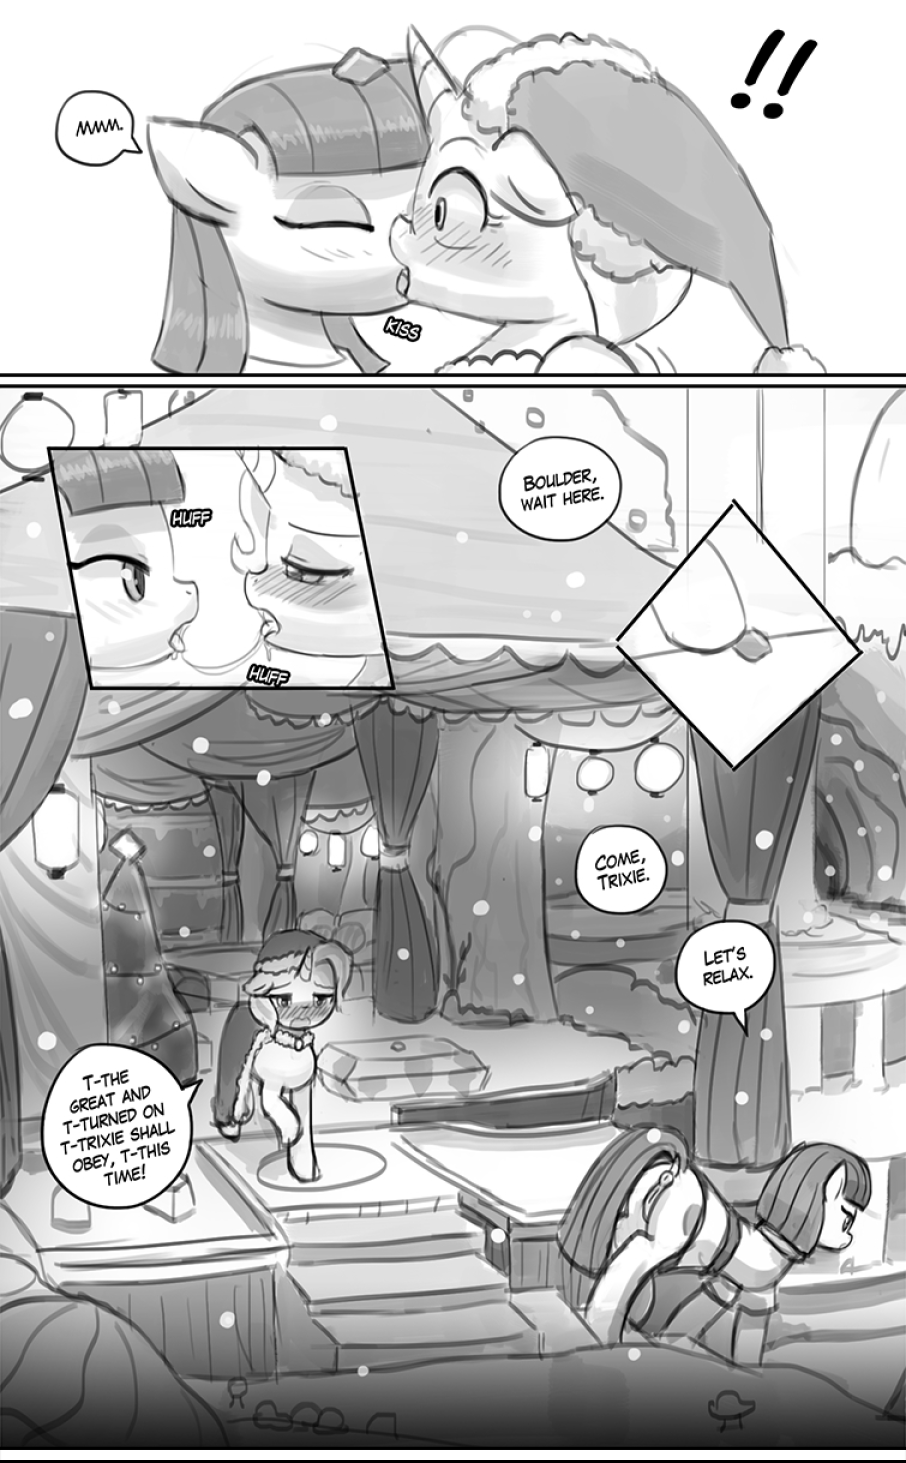 Homesick pt2: a hearths warming eve porn comic picture 9